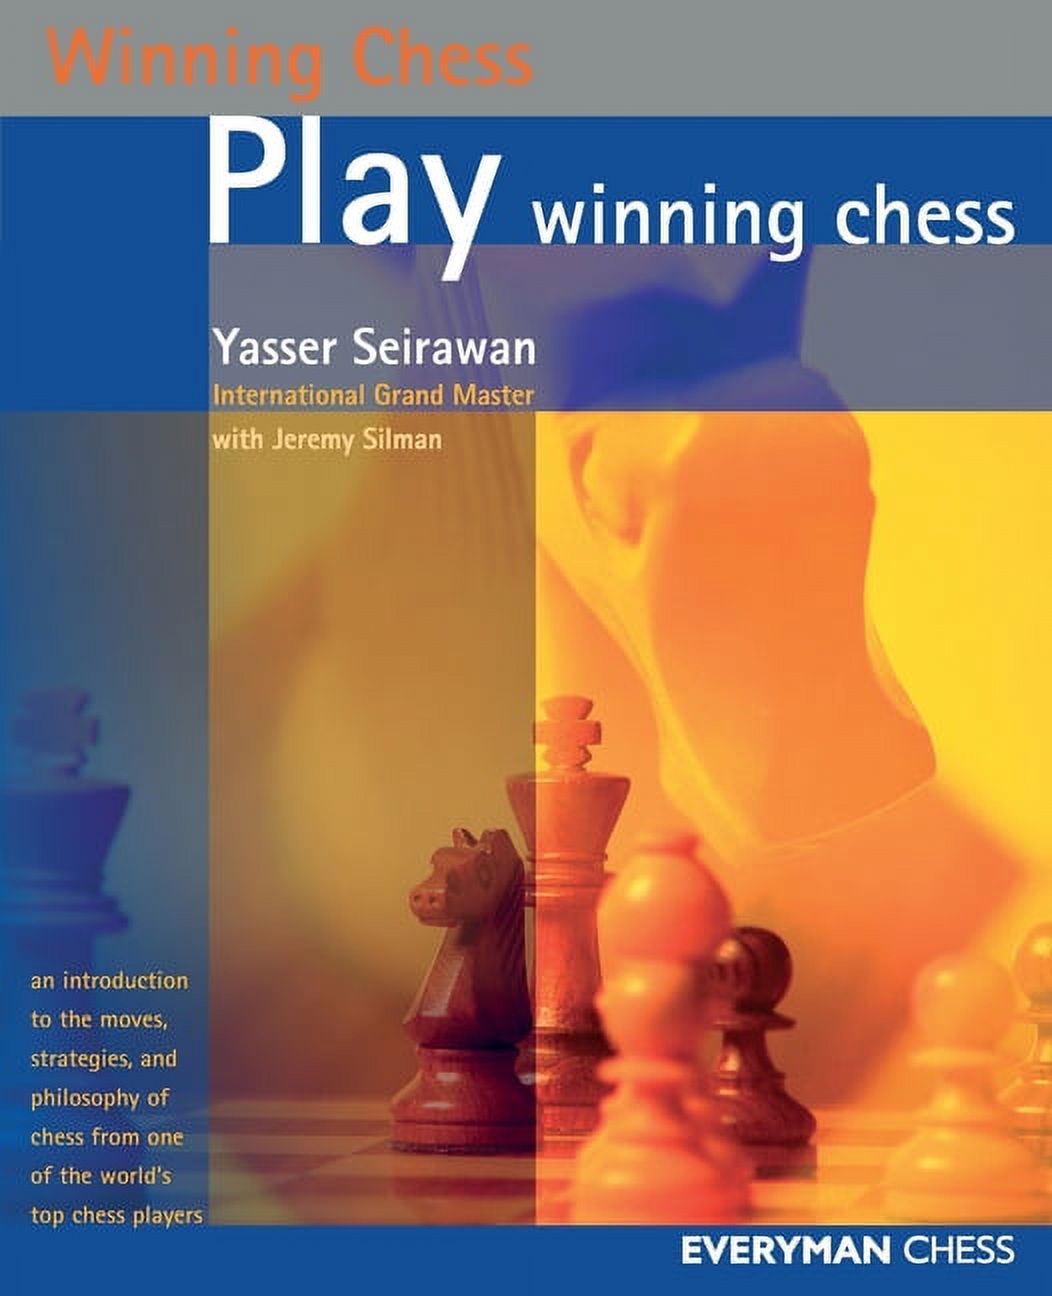 Play Winning Chess (Edition 1) (Paperback) - image 1 of 1